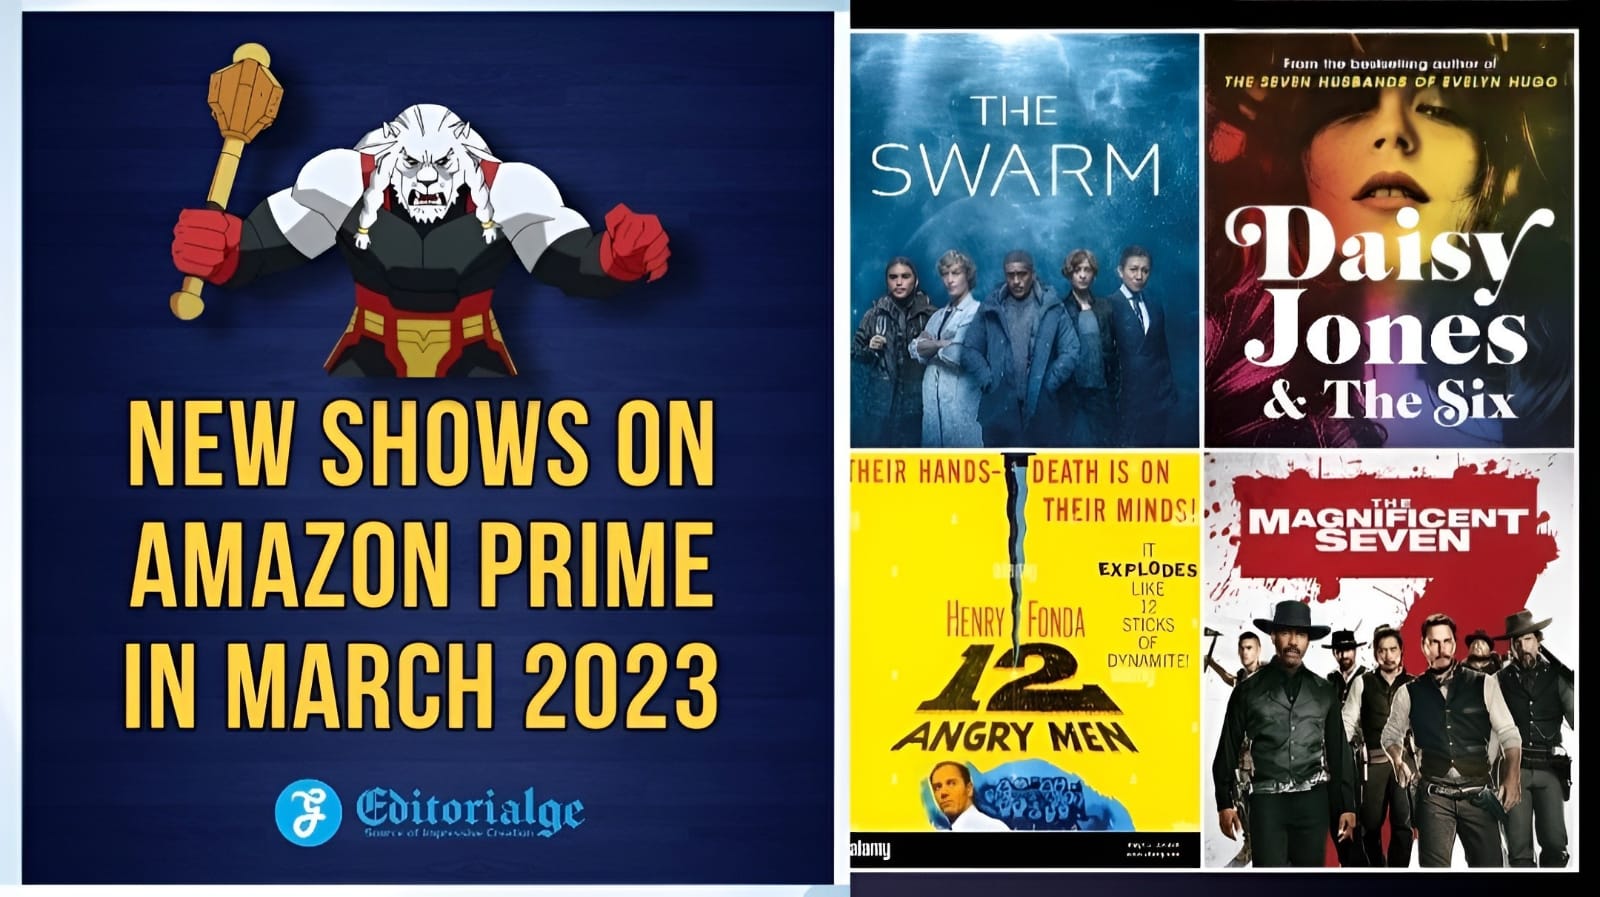 New Shows on Amazon Prime in March 2023